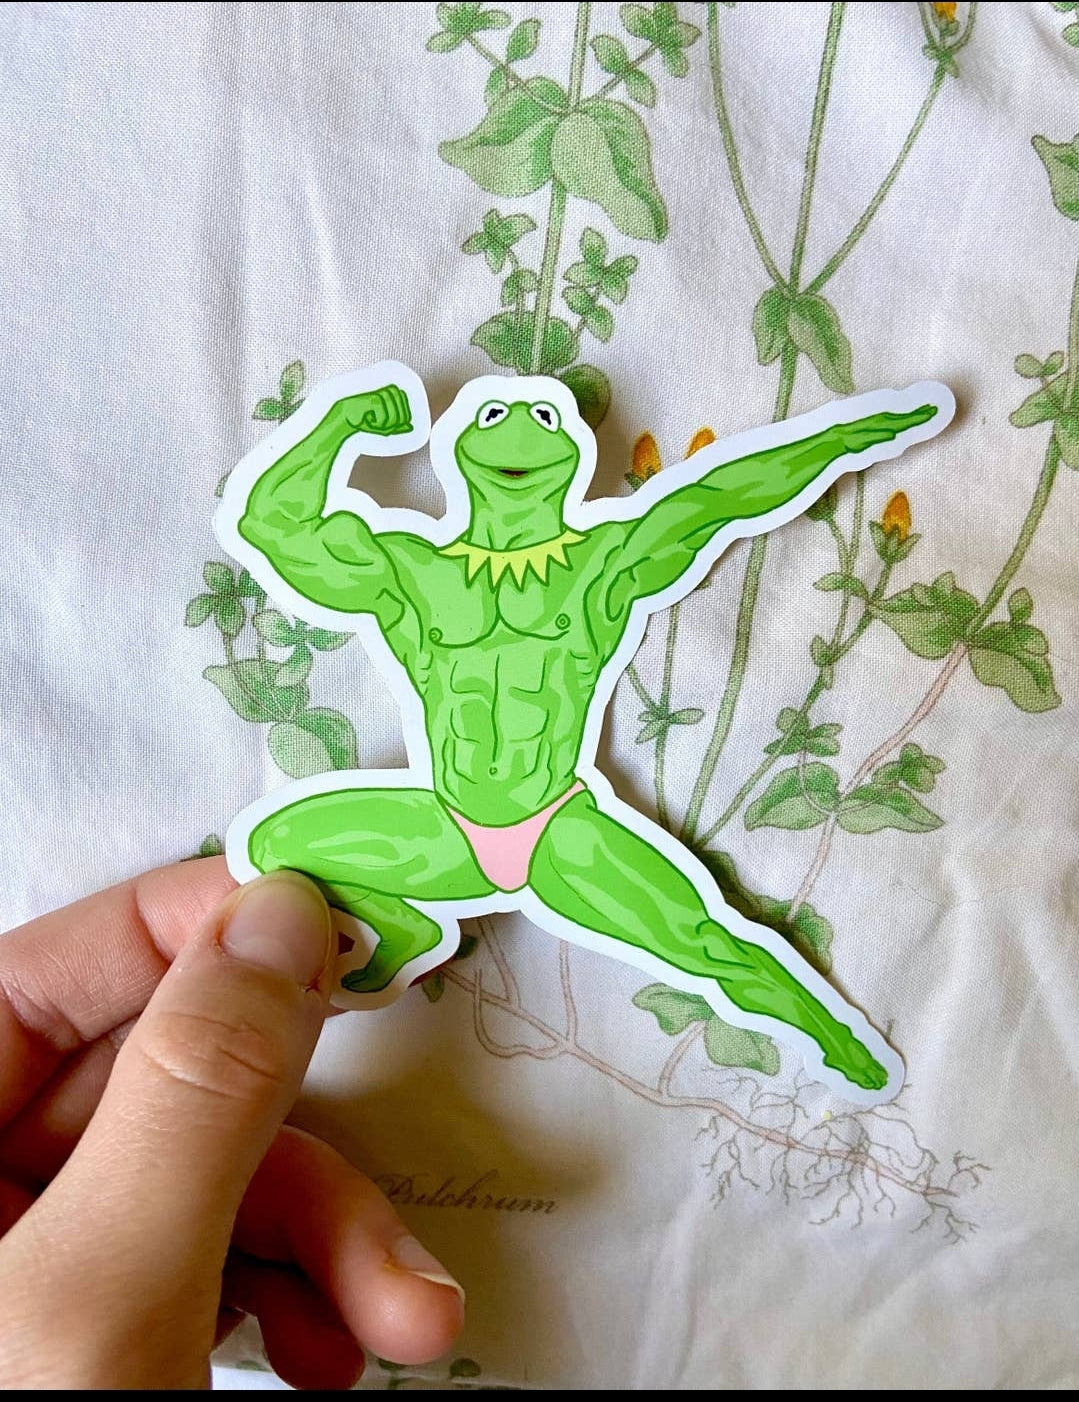 Buff Kermit the Frog Sticker - your choice of pose